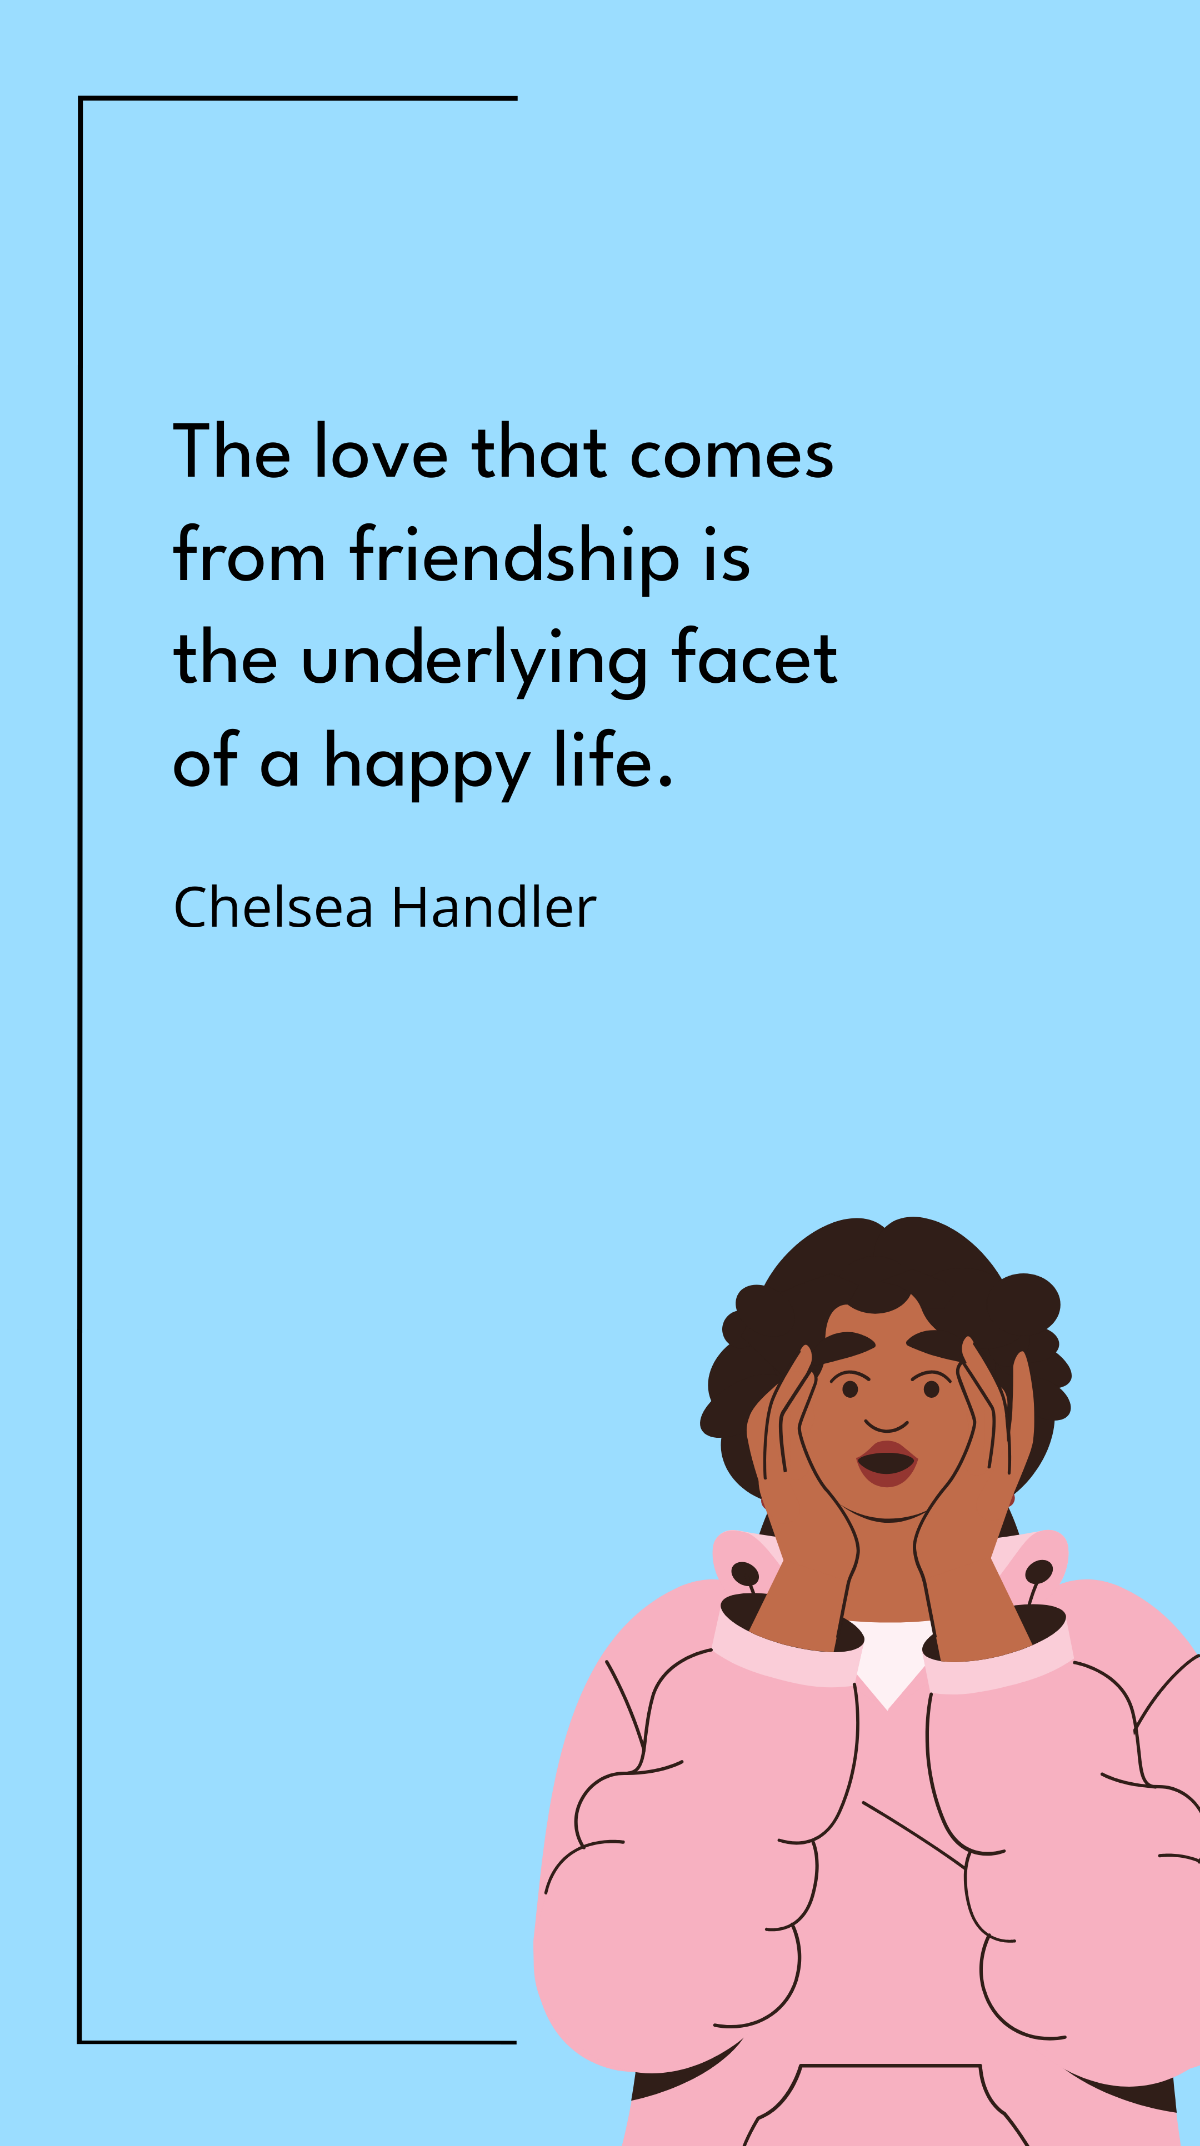 Chelsea Handler - The love that comes from friendship is the underlying facet of a happy life. Template